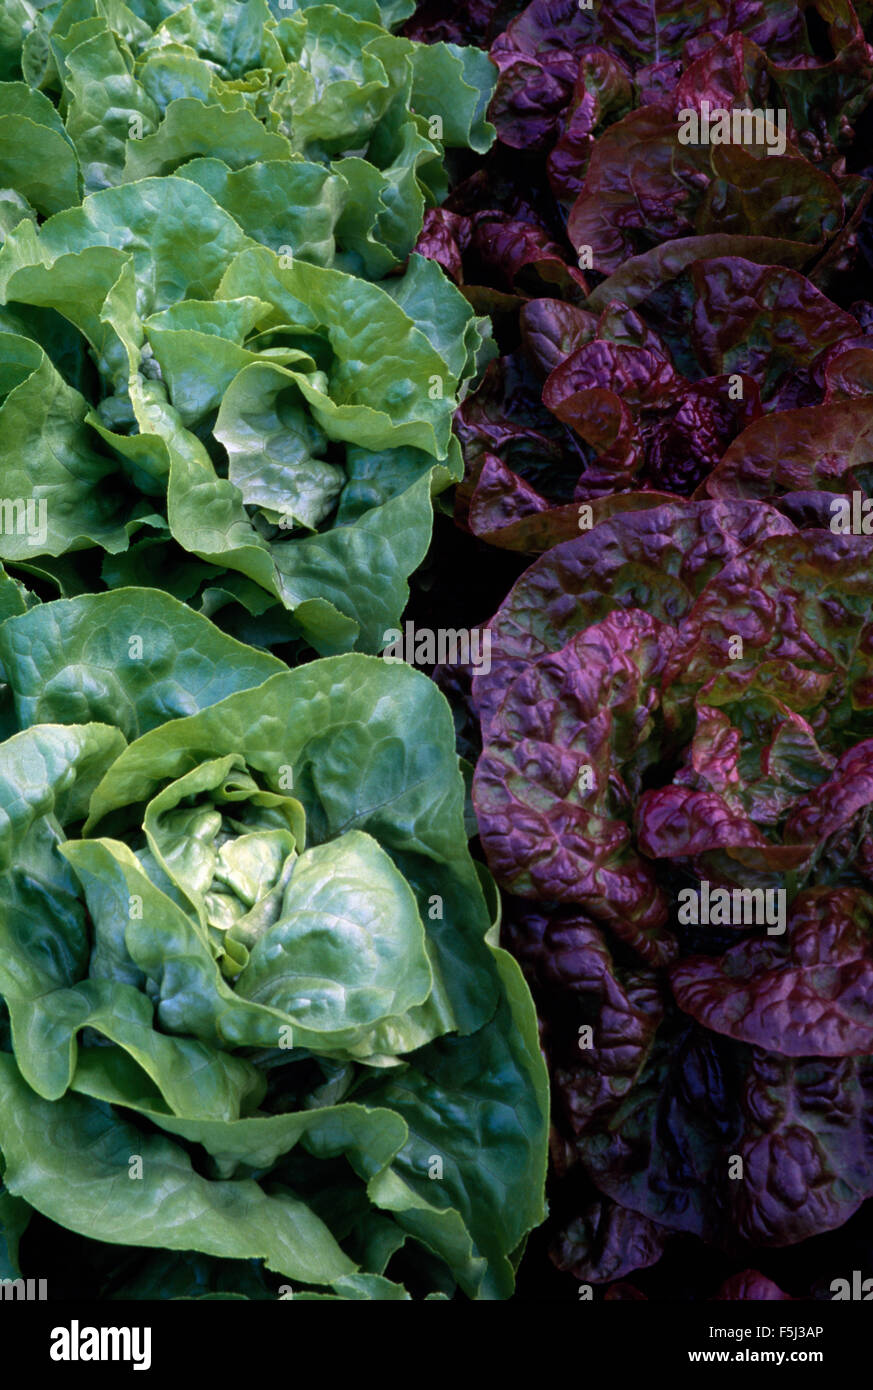 Close-up of a row of green and dark red lettuces Stock Photo